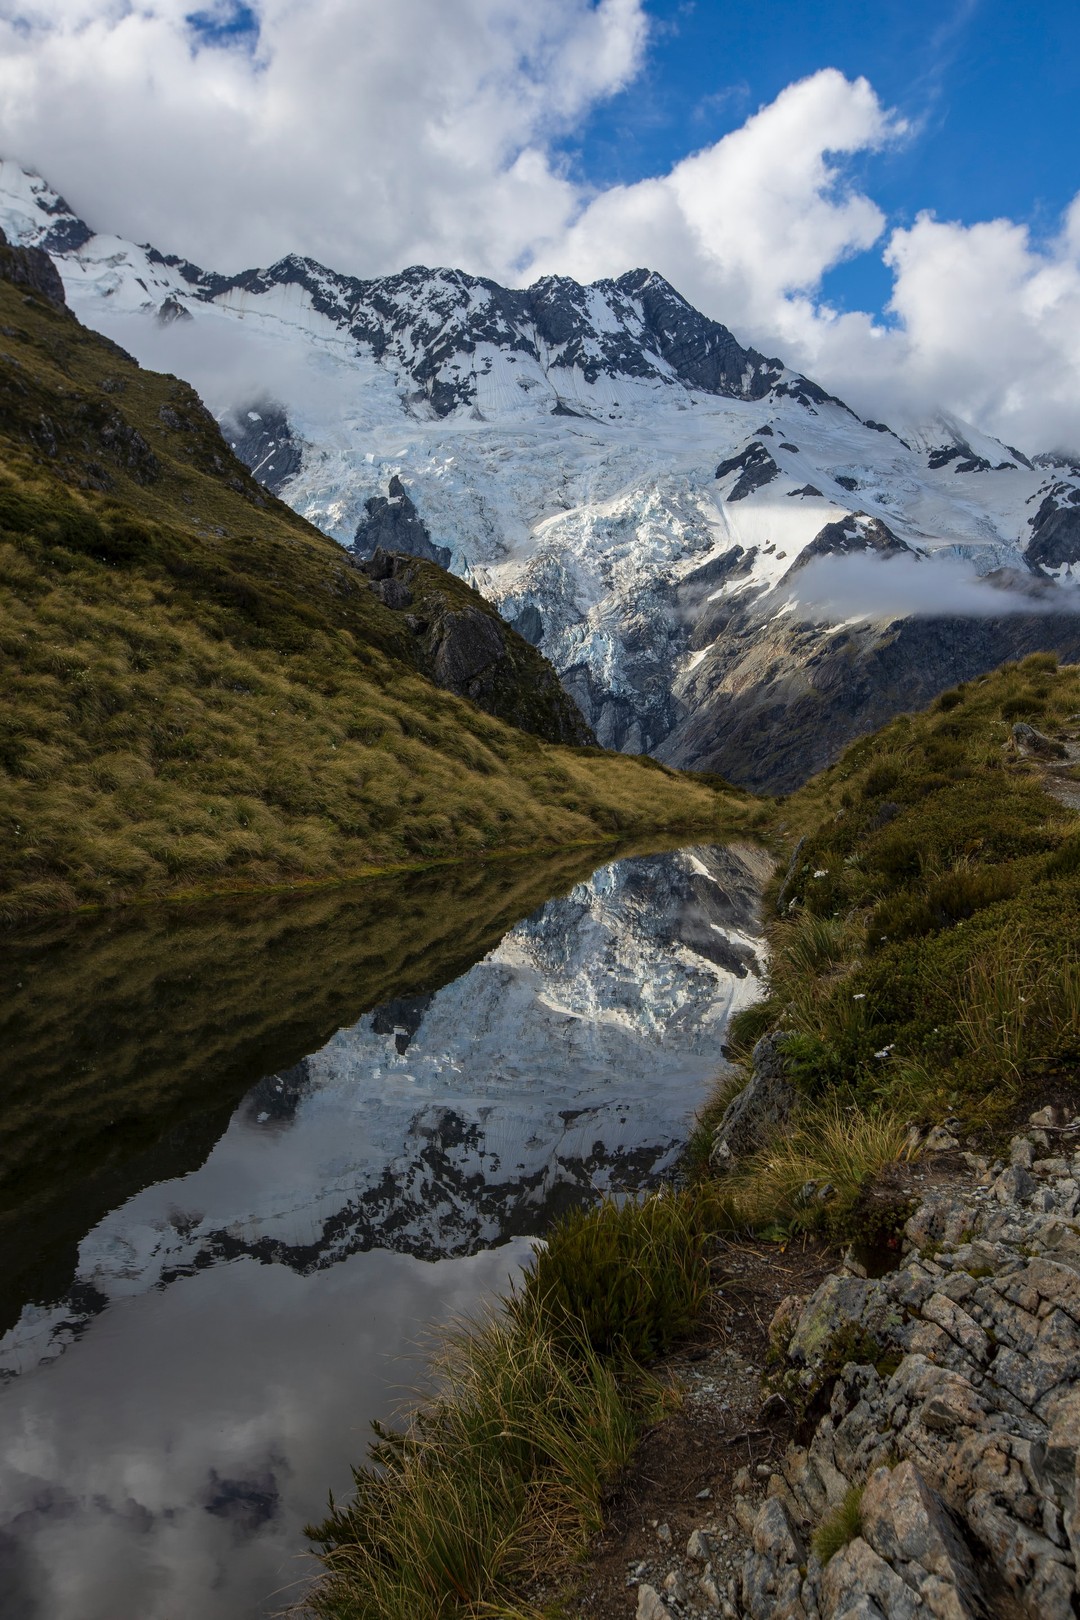 Aoraki/Mount Cook National Park: One of the best romantic getaways for couples who love nature.